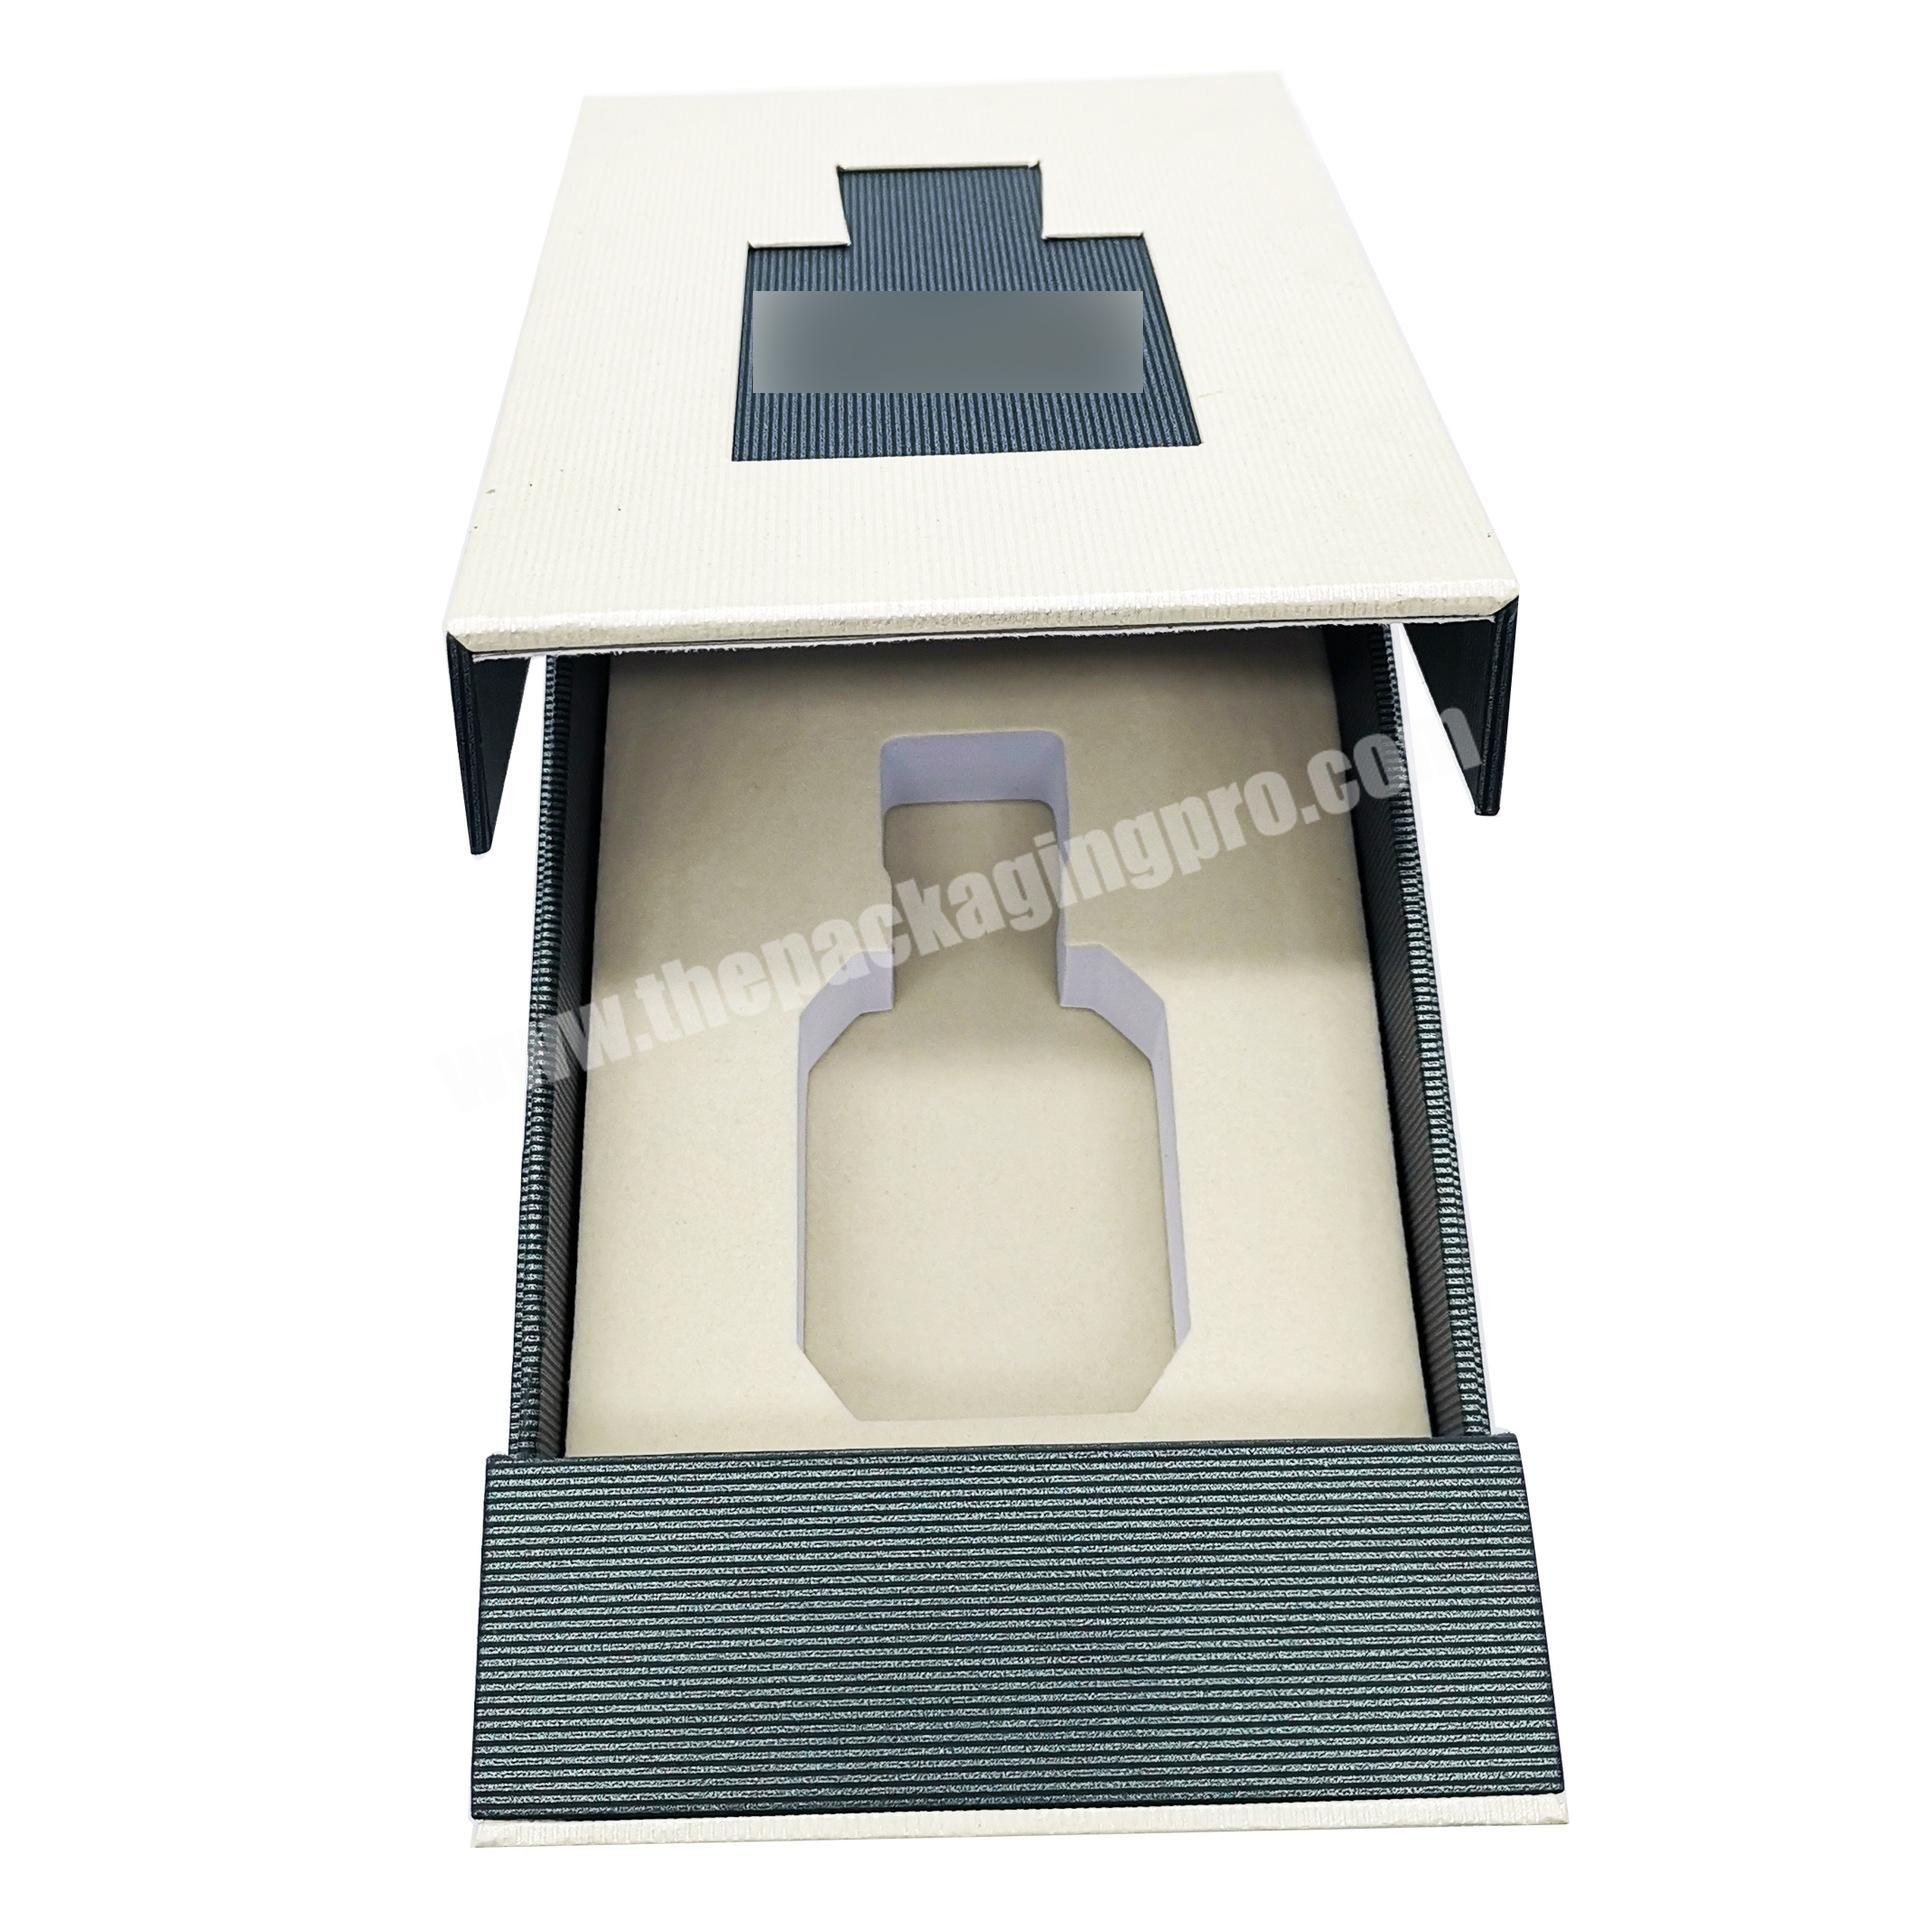 Perfume packing box gift wrap set packaging linen paper rigid boxes